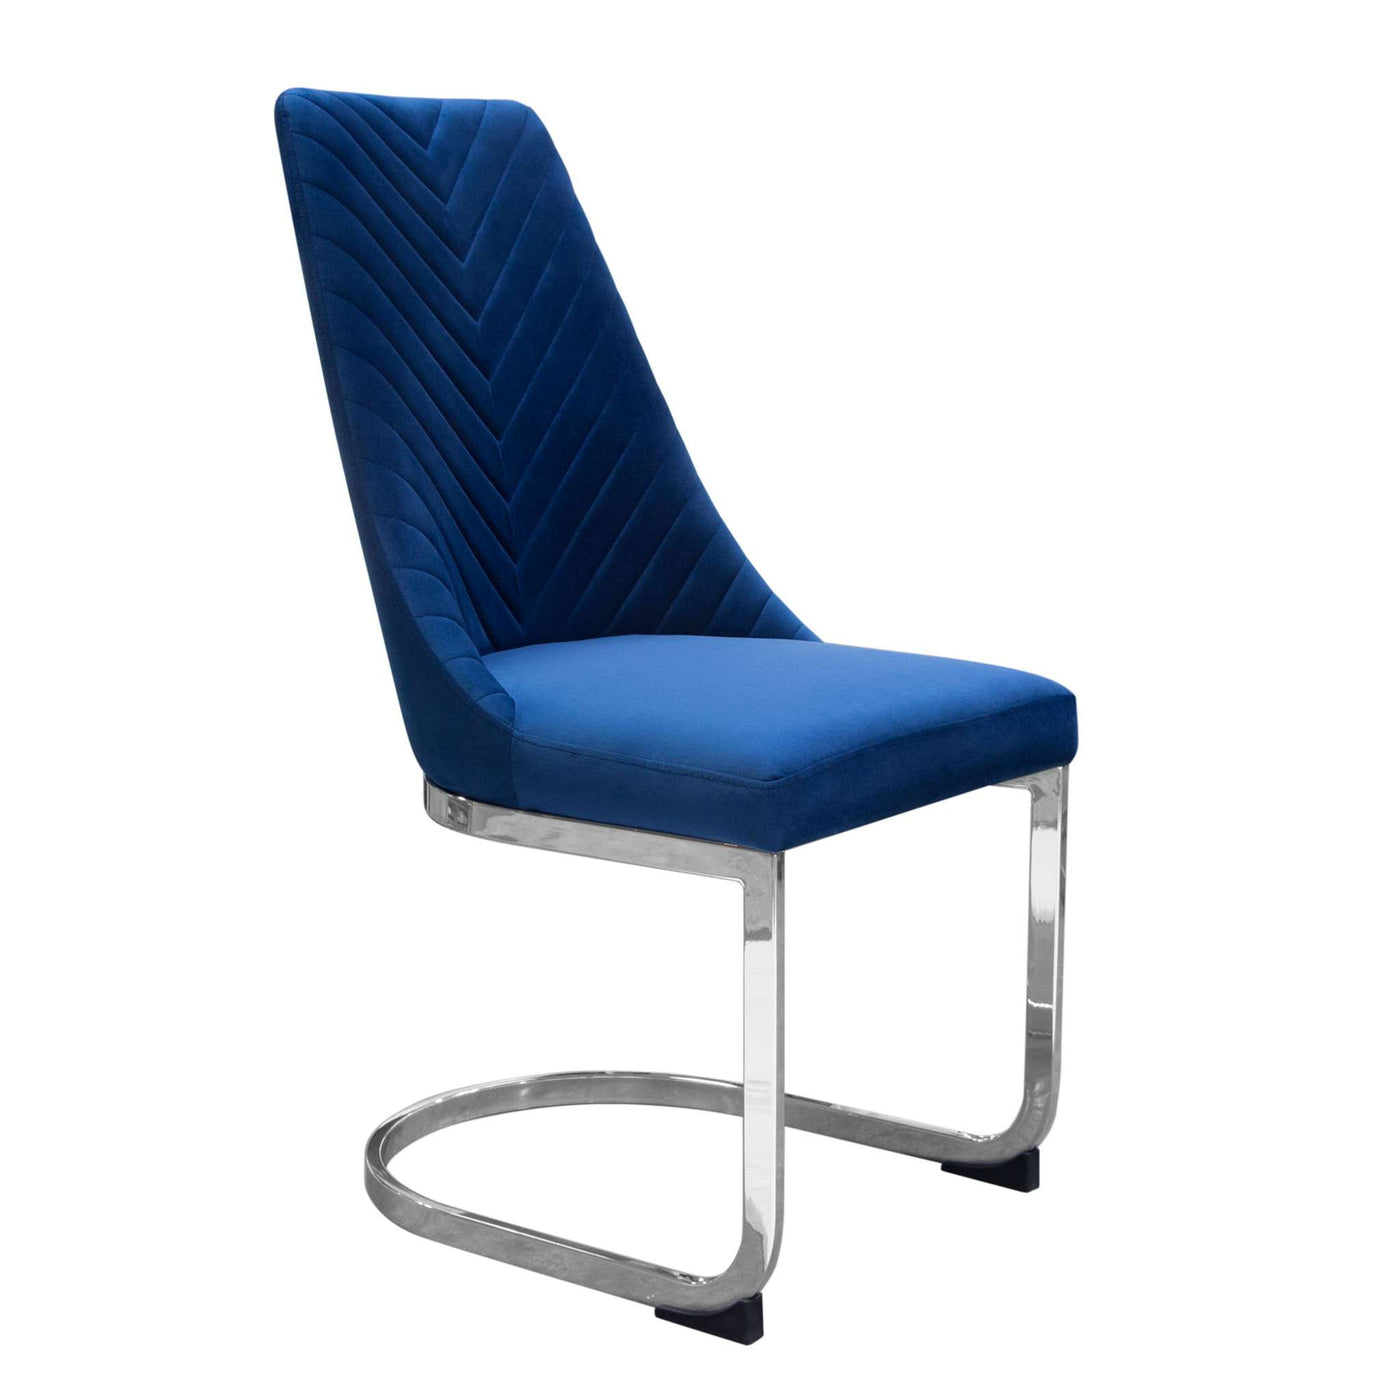 The Vogue Dining Chair by Diamond Sofa